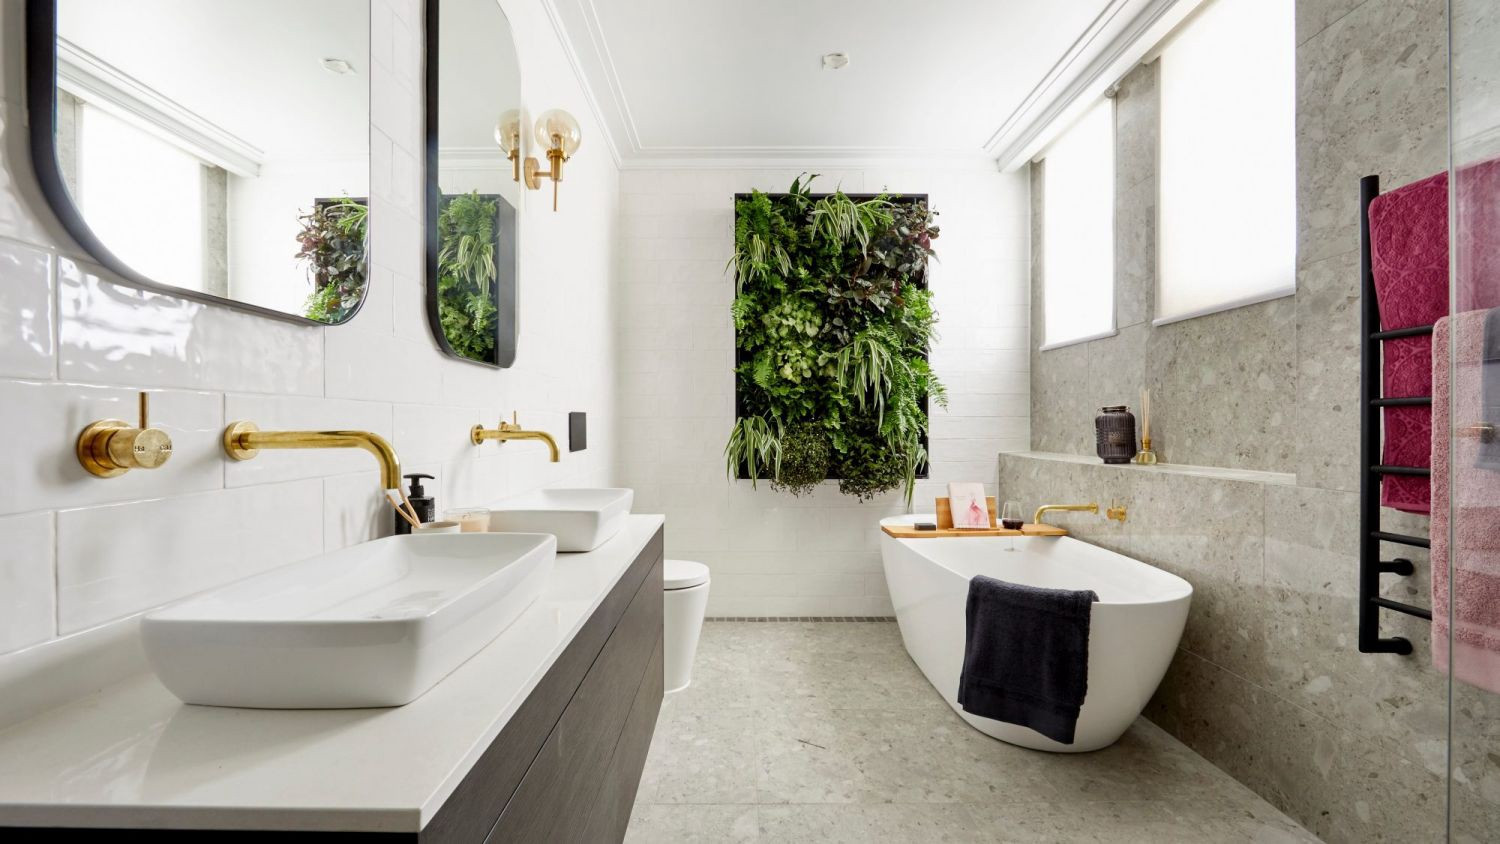 Latest Bathroom Design
 THE TOP BATHROOM TRENDS FOR 2019 A9 Architecture’s